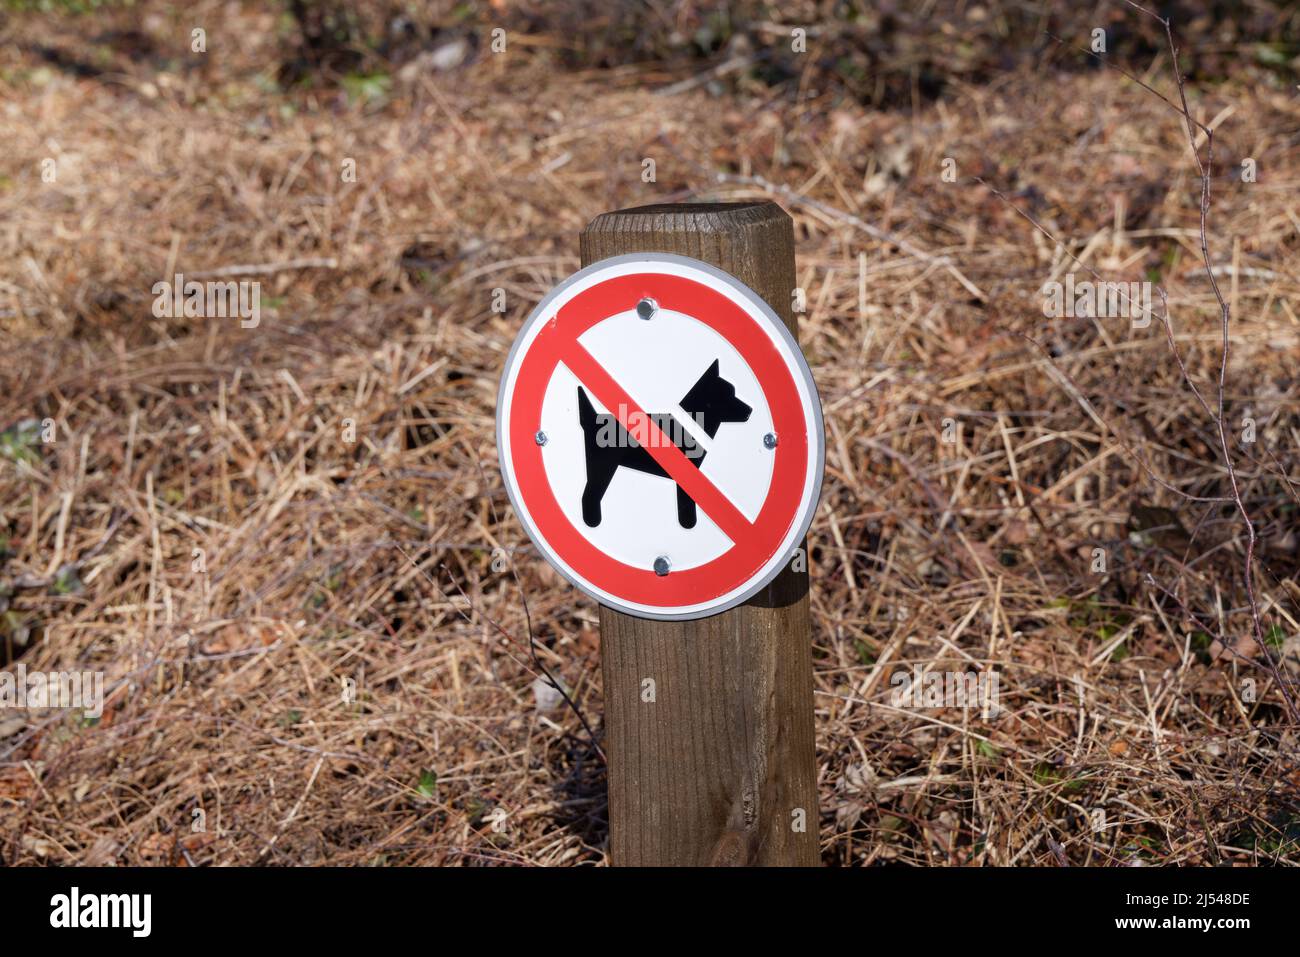 no dog zone: red and white no dog sign, animals are not allowed in this area because of dog excrement, pollution, autumn day sunshine Stock Photo